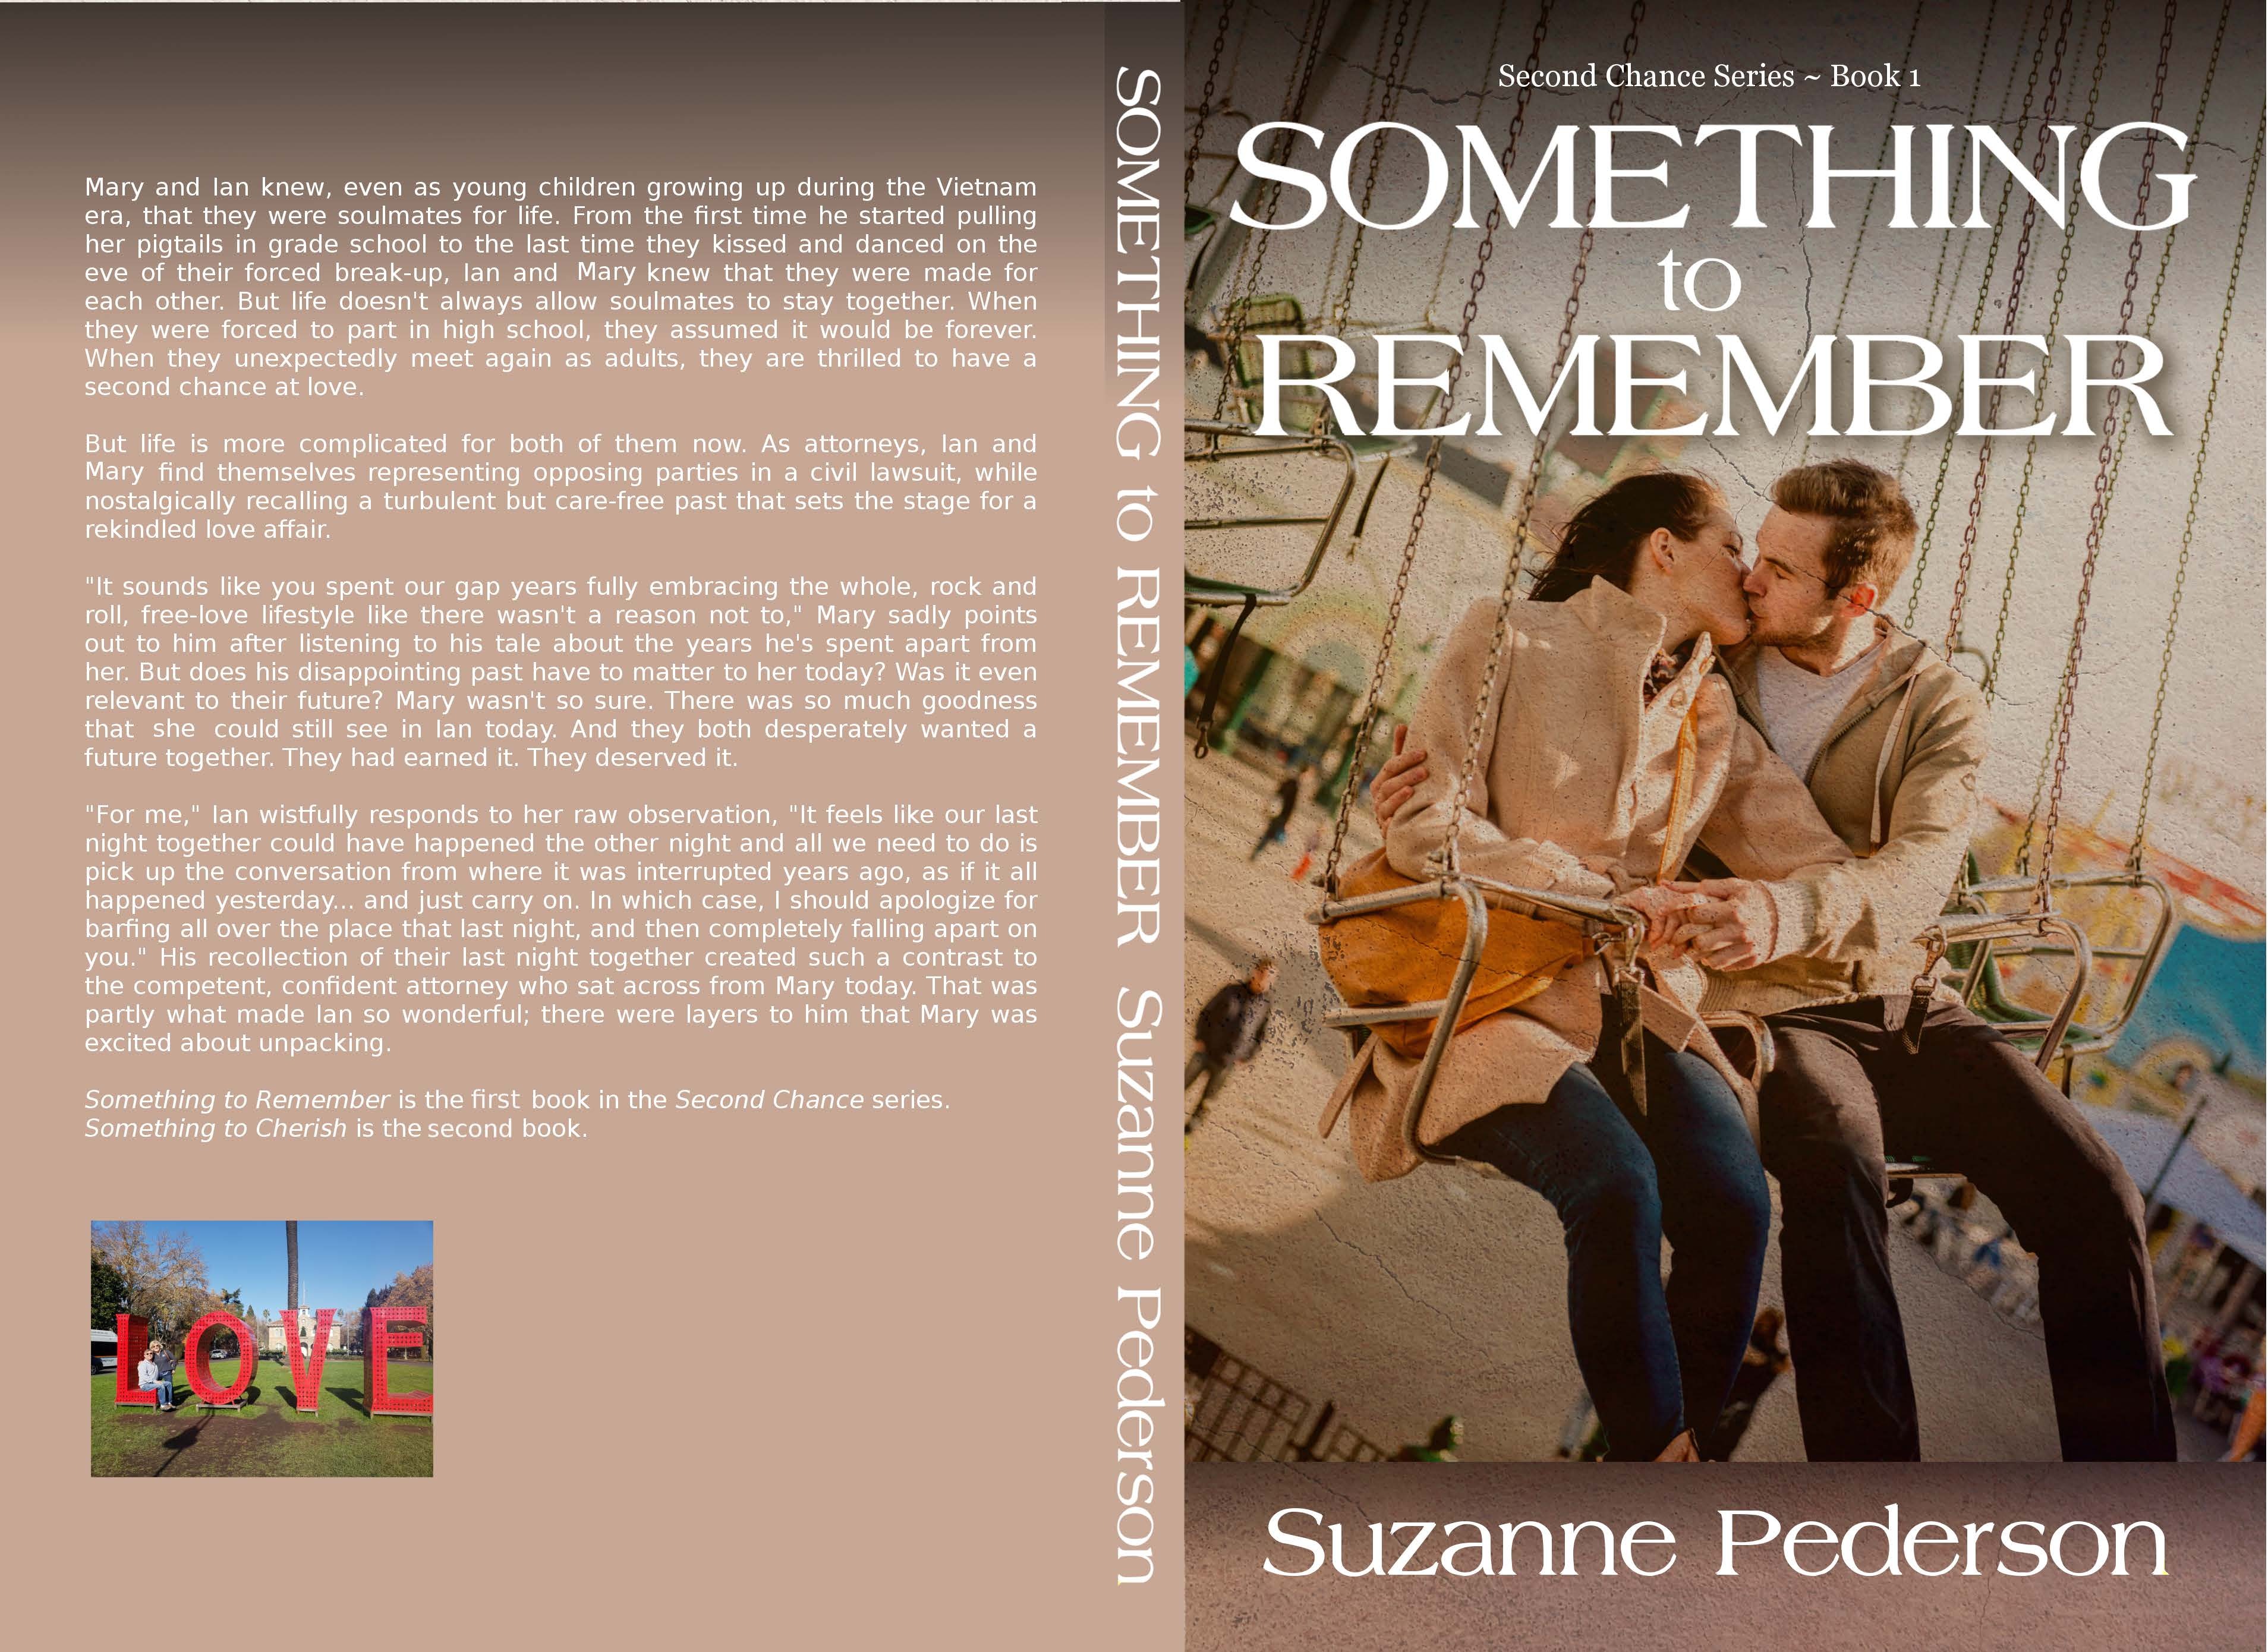 Something to Remember - Book 1 in the Second Chance series.